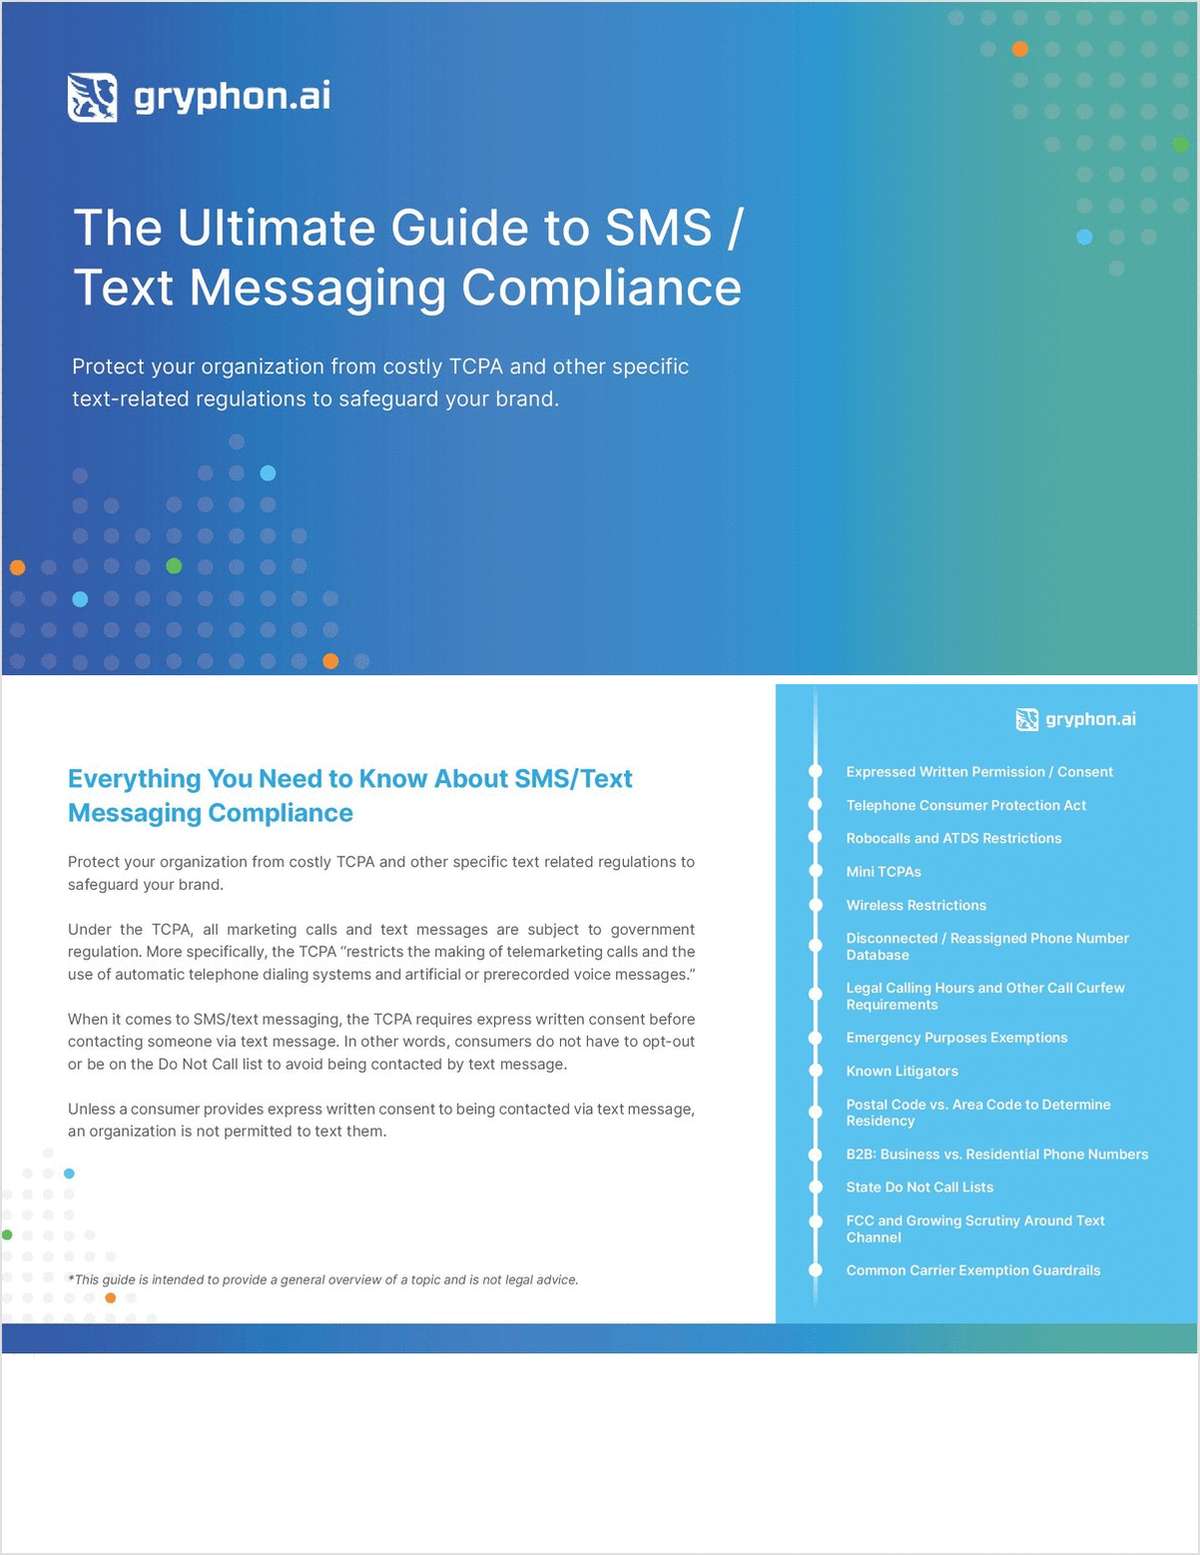 The Ultimate Guide to SMS/Text Messaging Compliance link